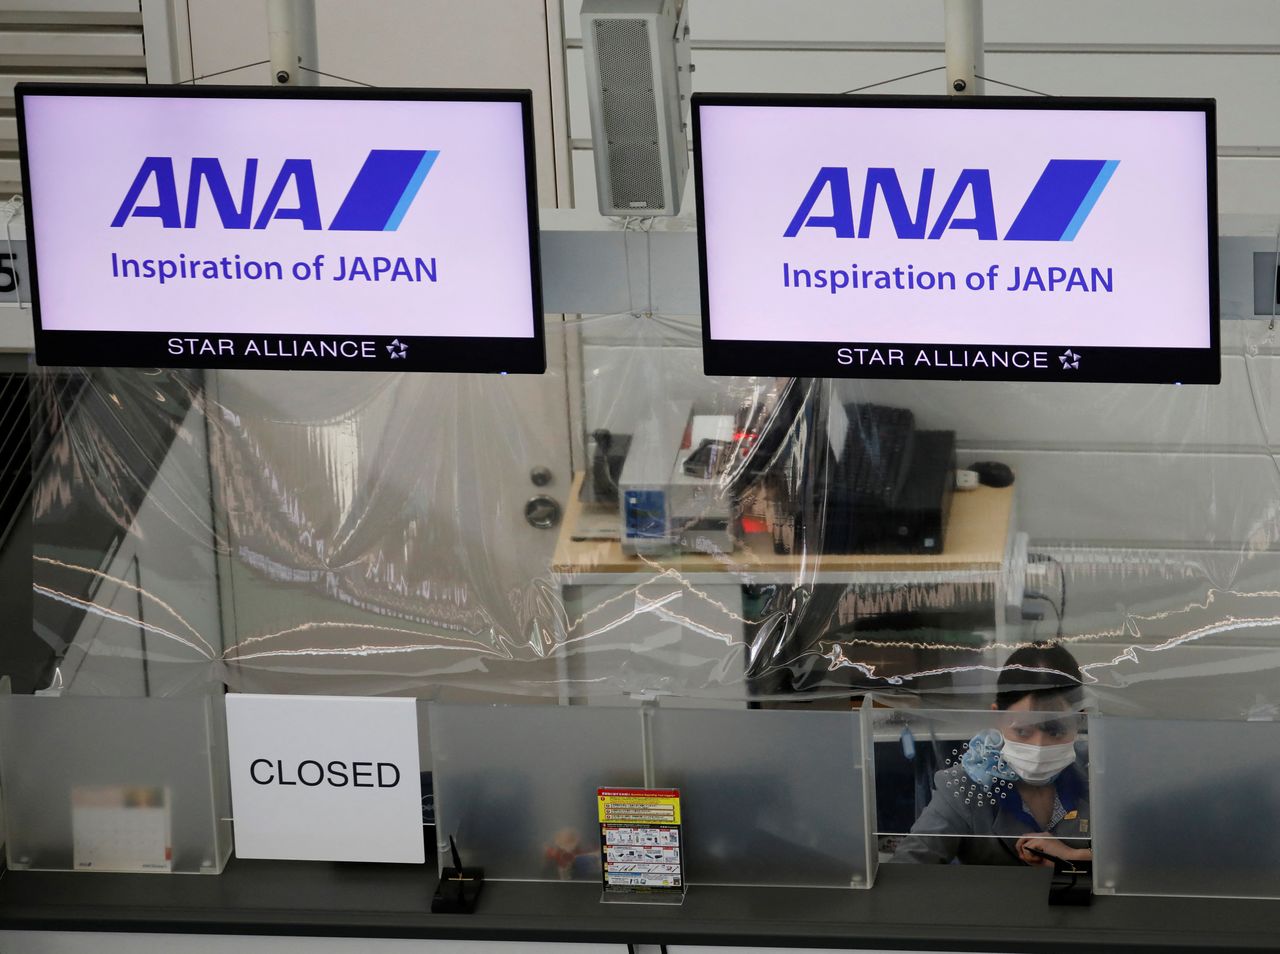 FILE PHOTO: A staff member of All Nippon Airways (ANA) wearing a protective face mask sits behind a plastic curtain, installed in order to prevent infections following the coronavirus disease (COVID-19) outbreak, at a counter in a terminal of the Tokyo International Airport, Tokyo Japan October 27, 2020. REUTERS/Kim Kyung-Hoon